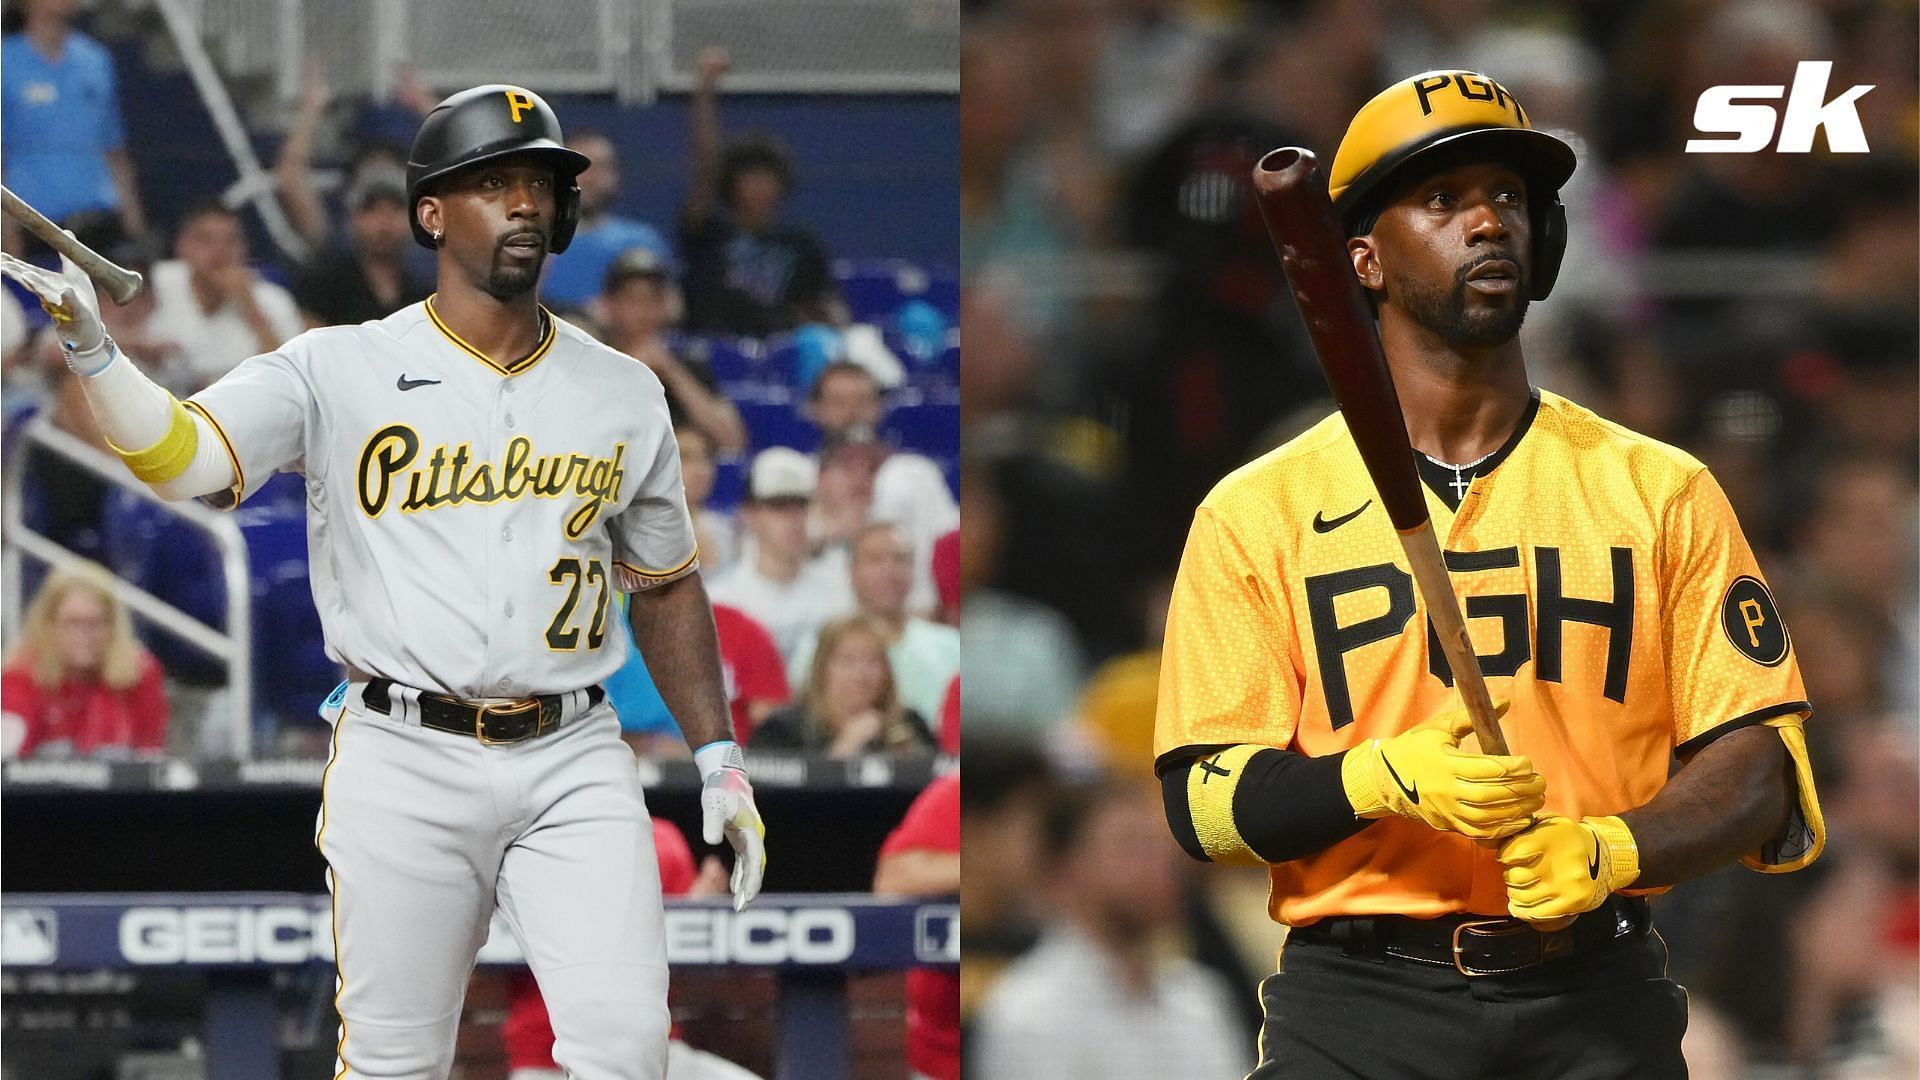 The Pittsburgh Pirates and outfielder Andrew McCutchen are reportedly interested in a contract extension